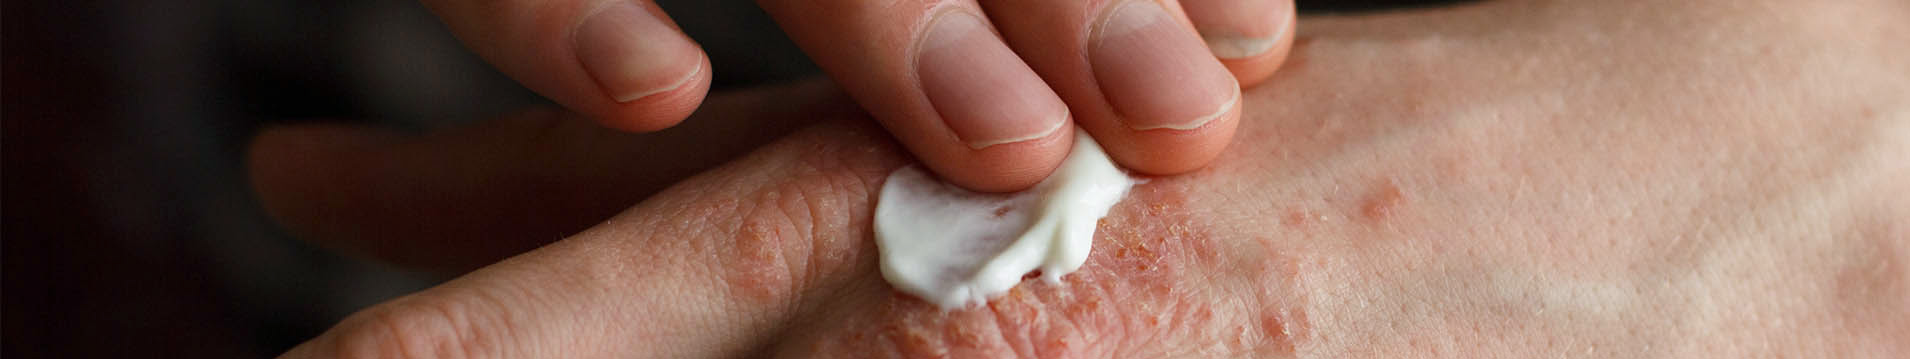 Image of Topical Cream Being Applied to Rash on Hand